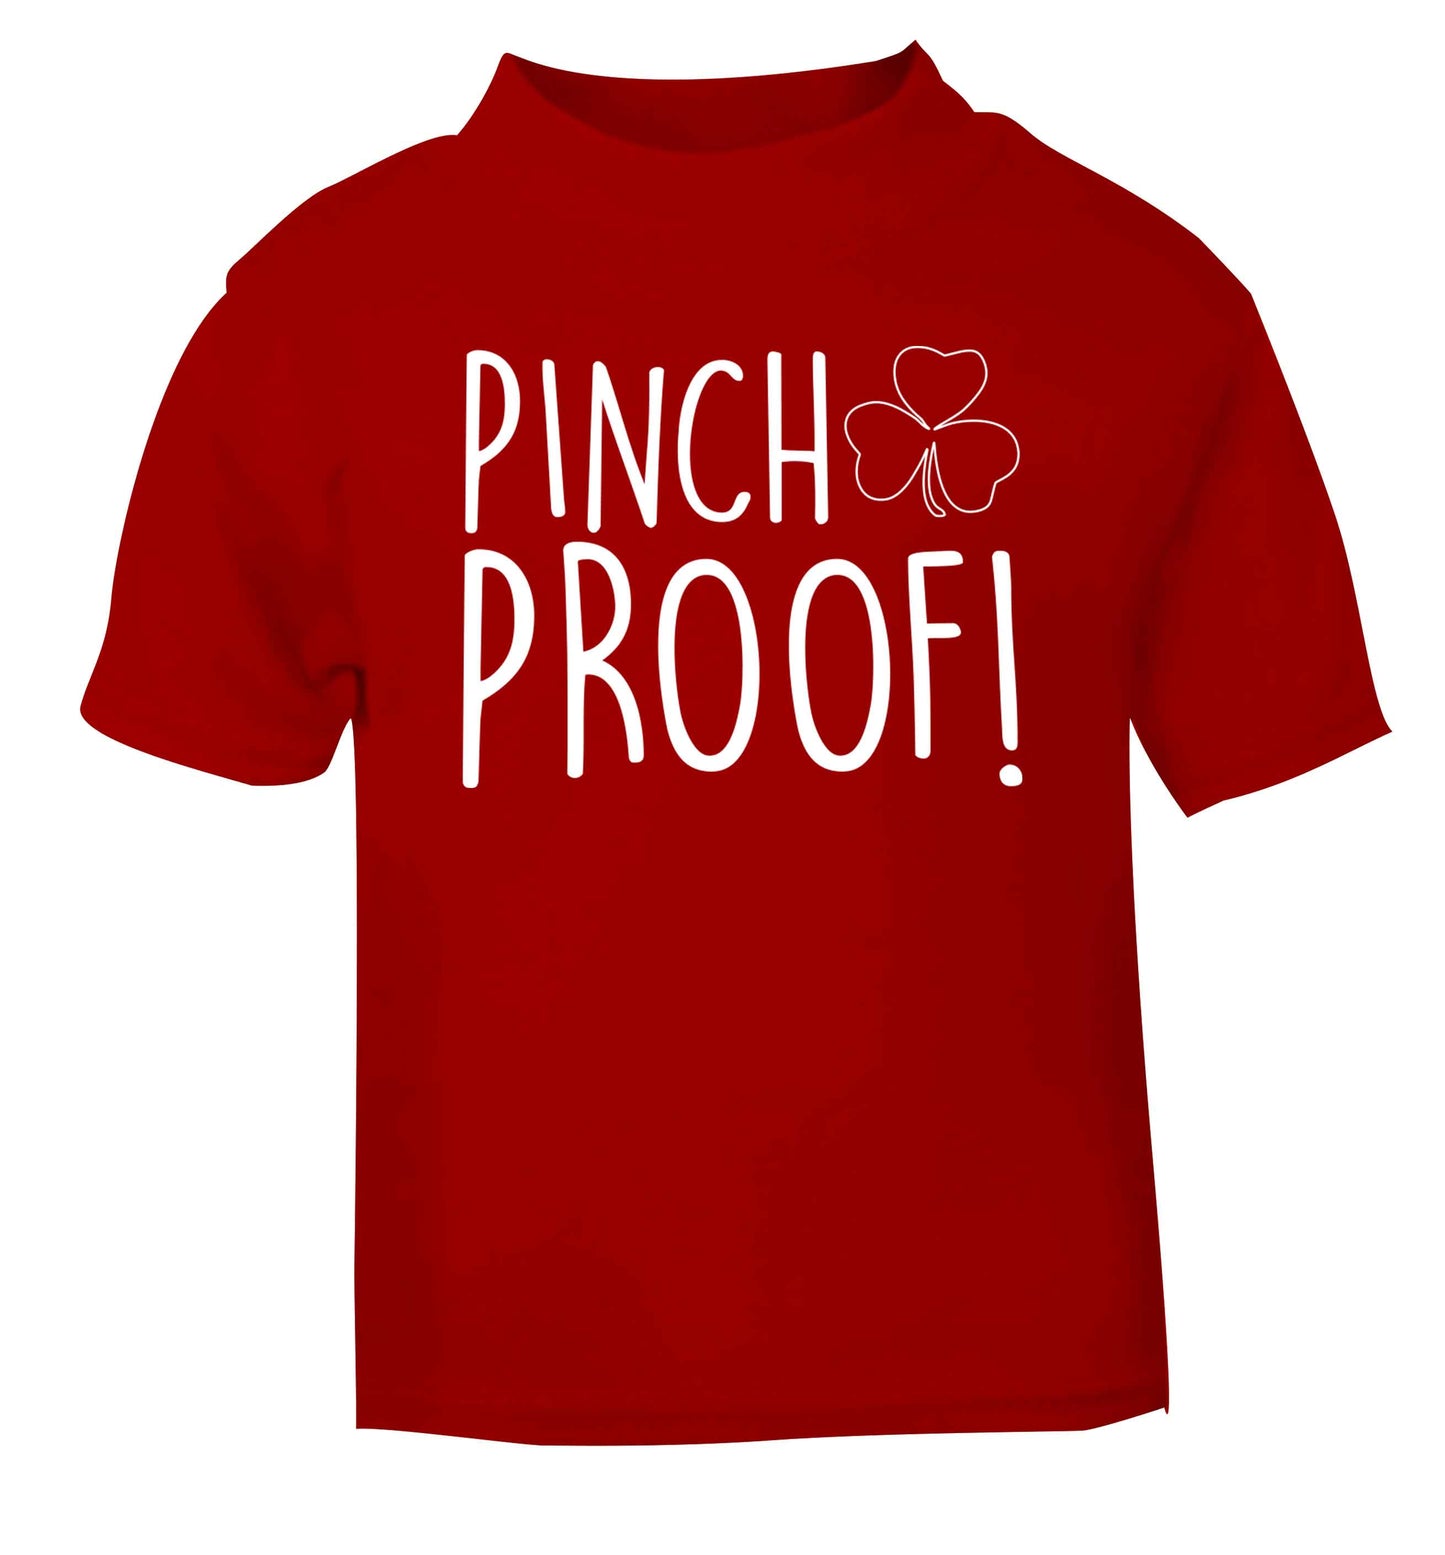 Pinch Proof red baby toddler Tshirt 2 Years